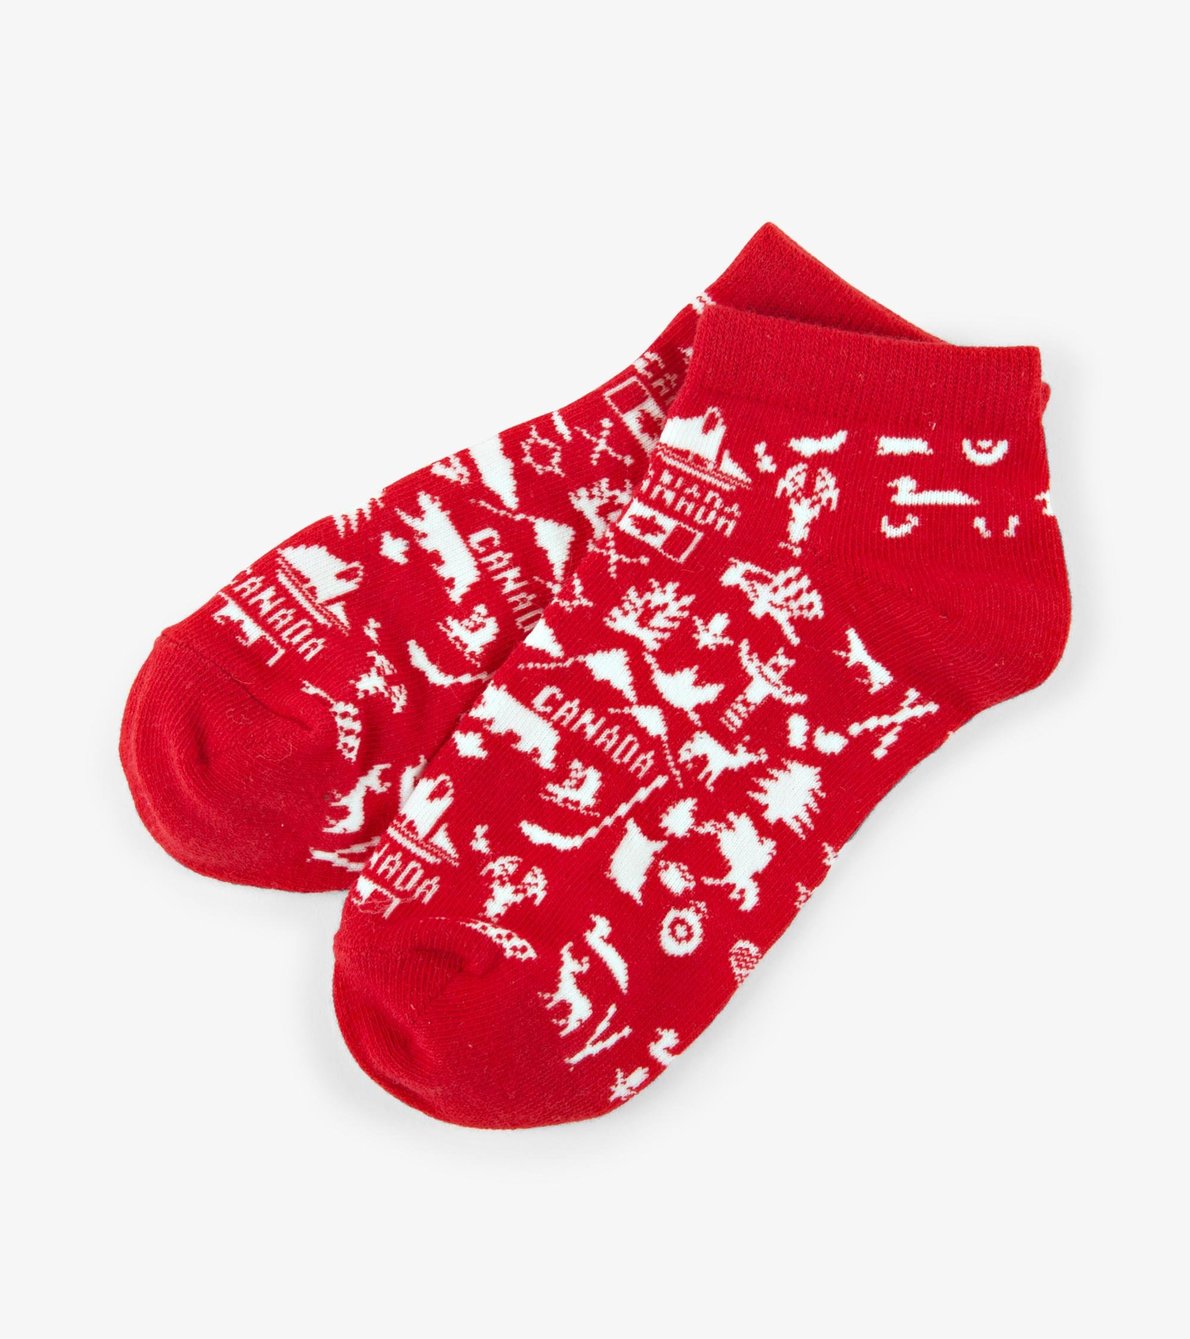 View larger image of Oh Canada Women's Ankle Socks